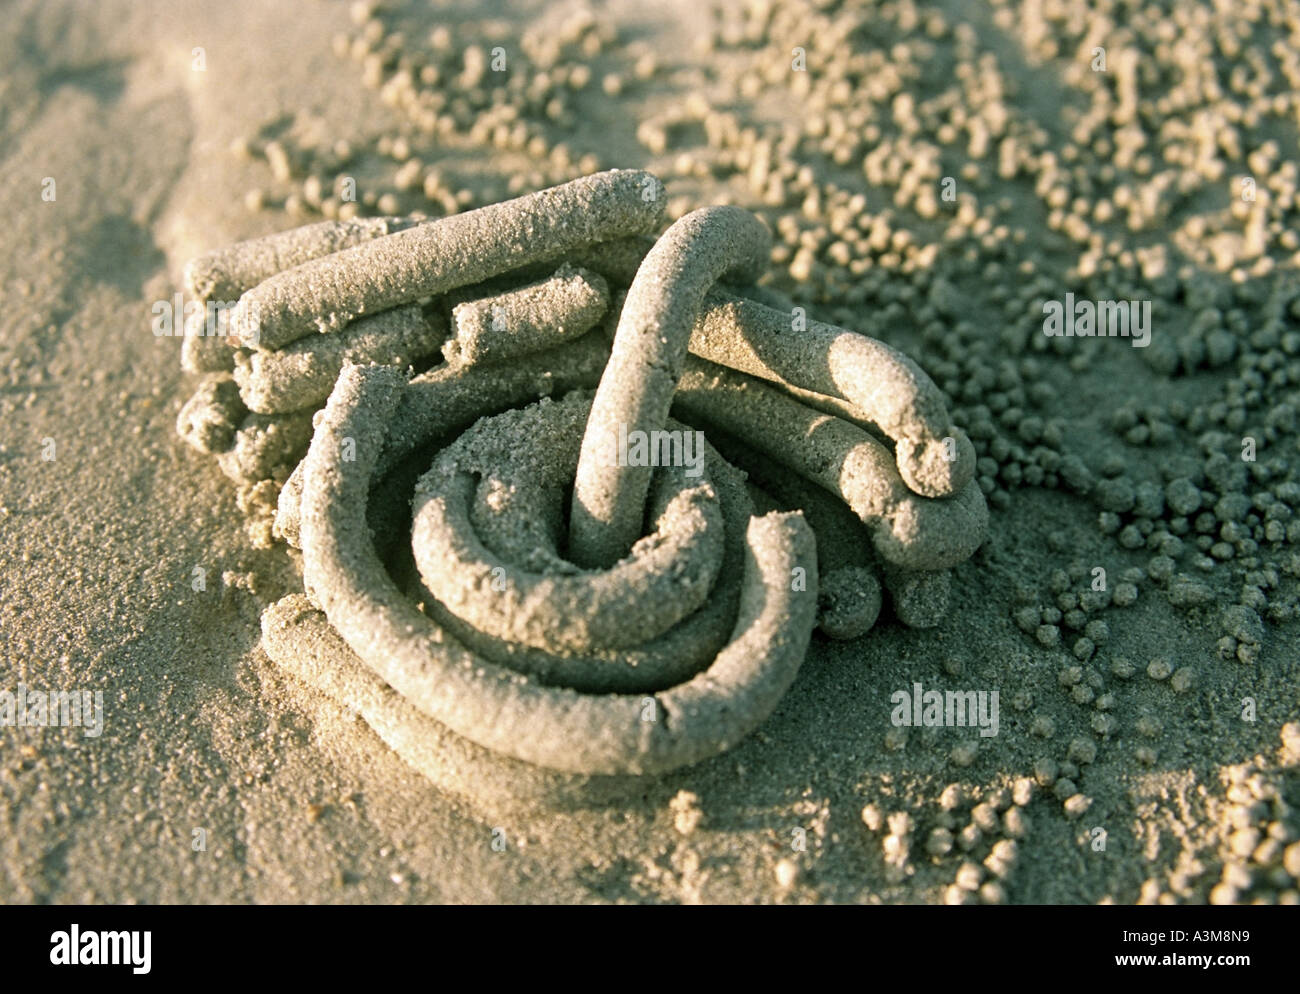 Excreted deposit from a sand worm on a beach in Thailand. DQ32a Stock Photo